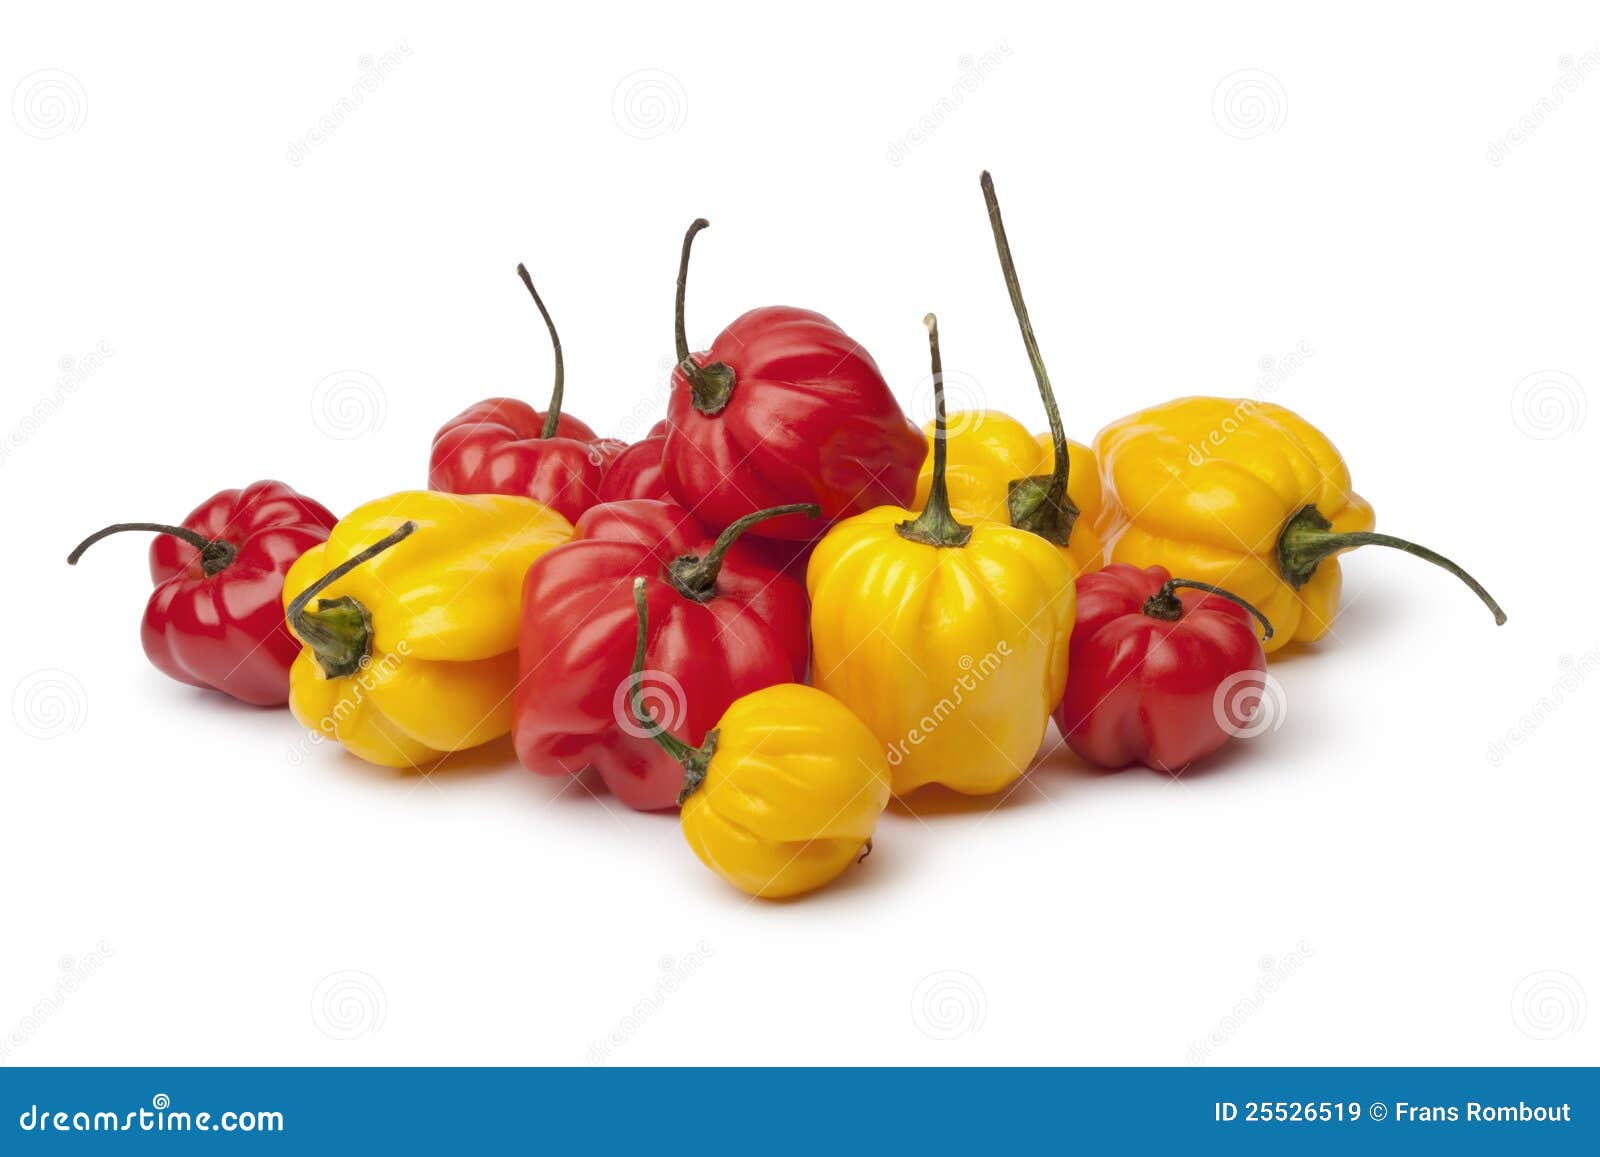 yellow and red scotch bonnet chili peppers